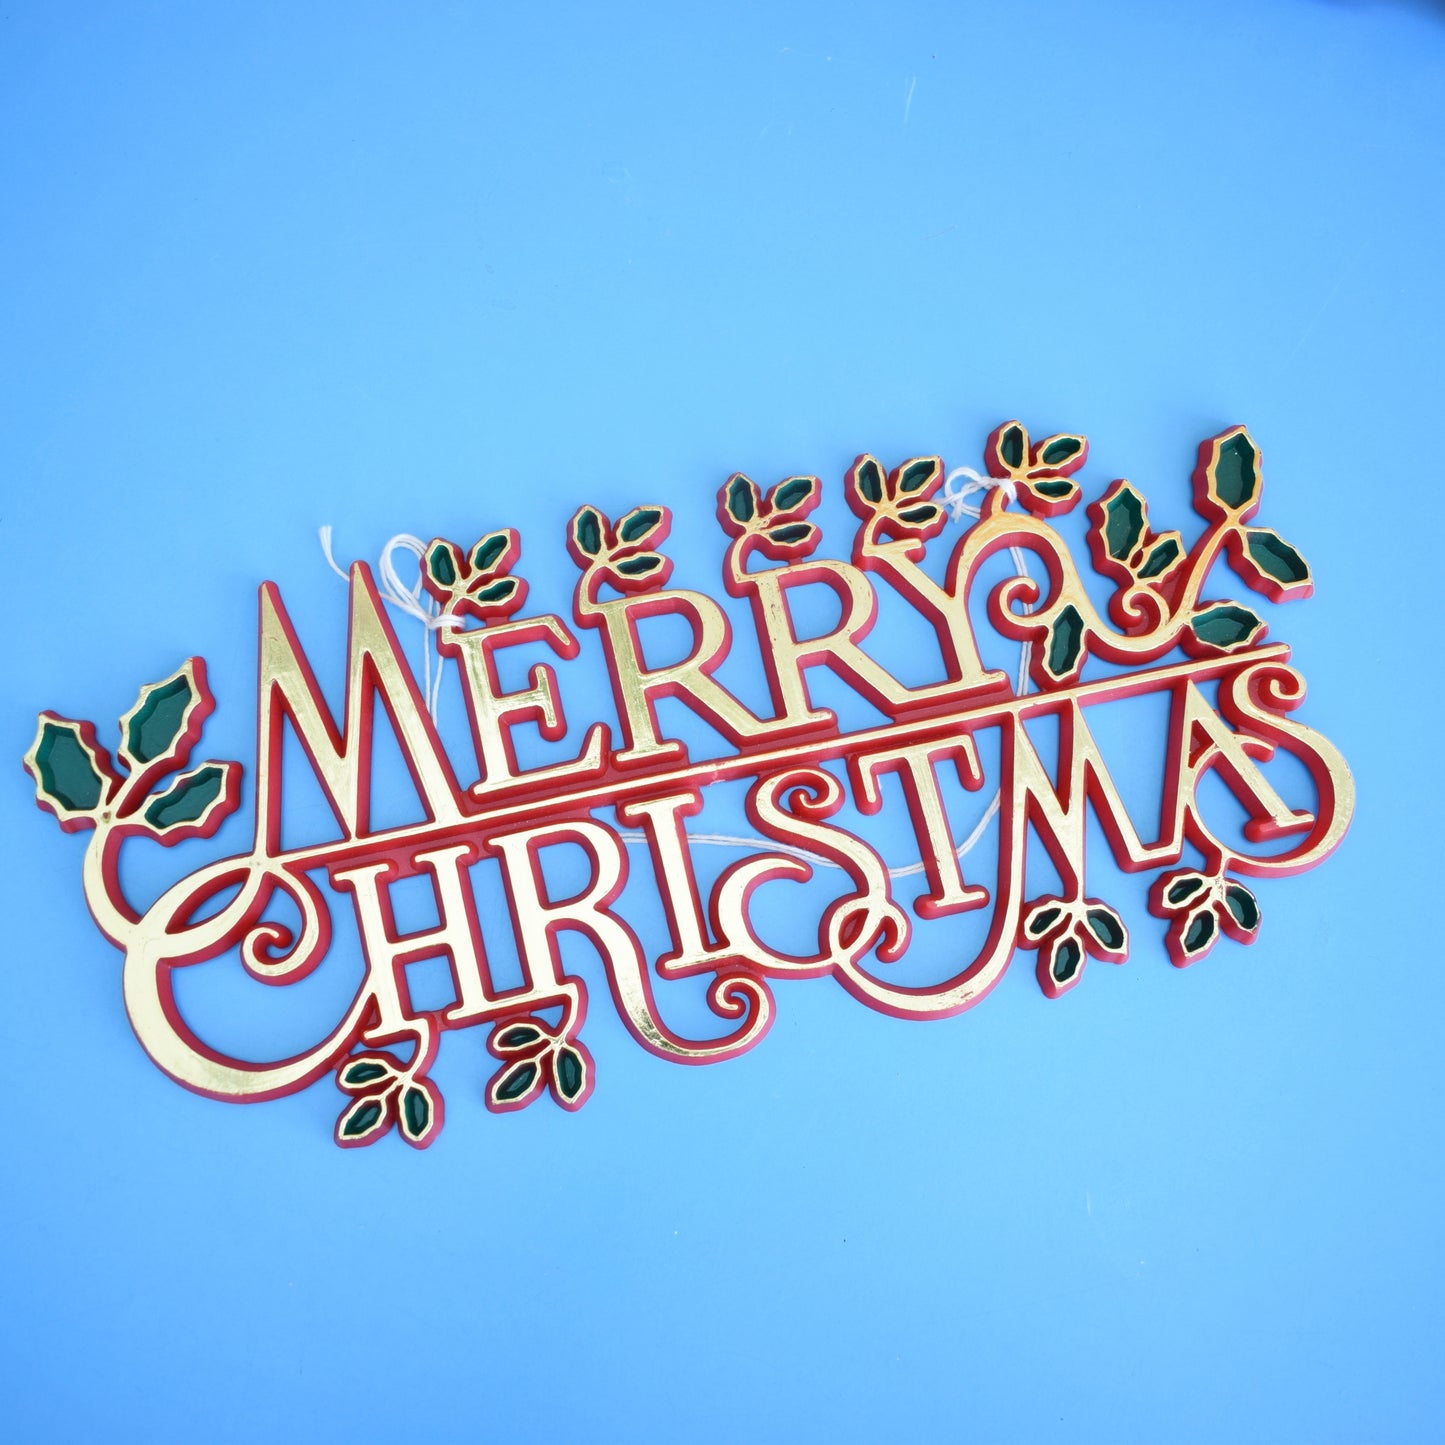 Vintage 1970s Merry Christmas Signs